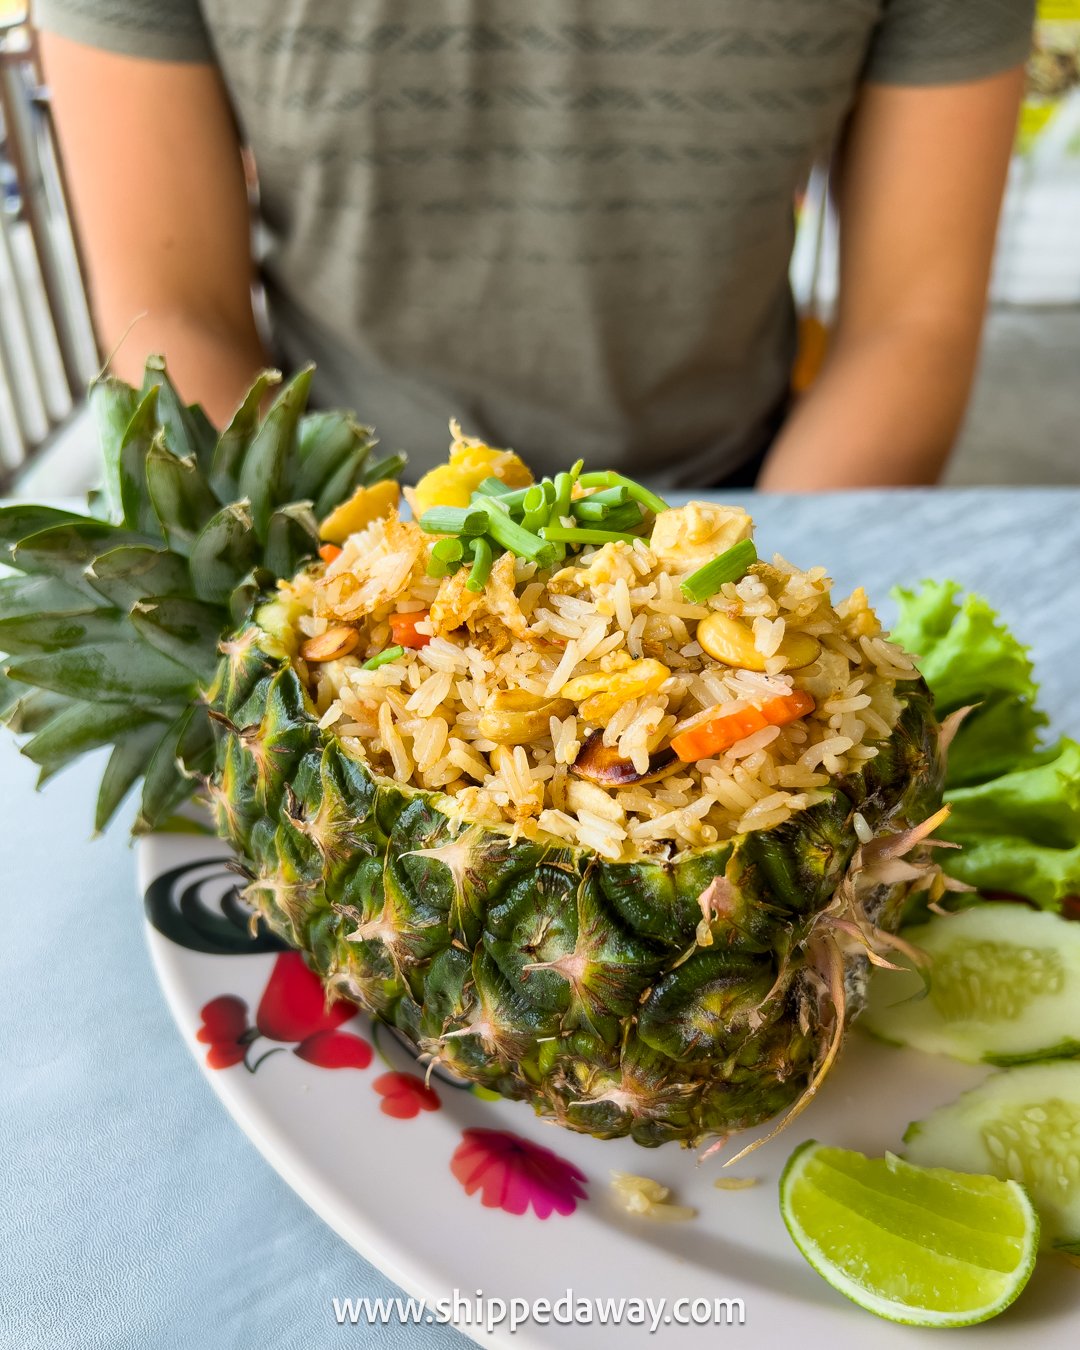 Pineapple fried rice served in a pineapple - Food in Koh Samui, Thailand